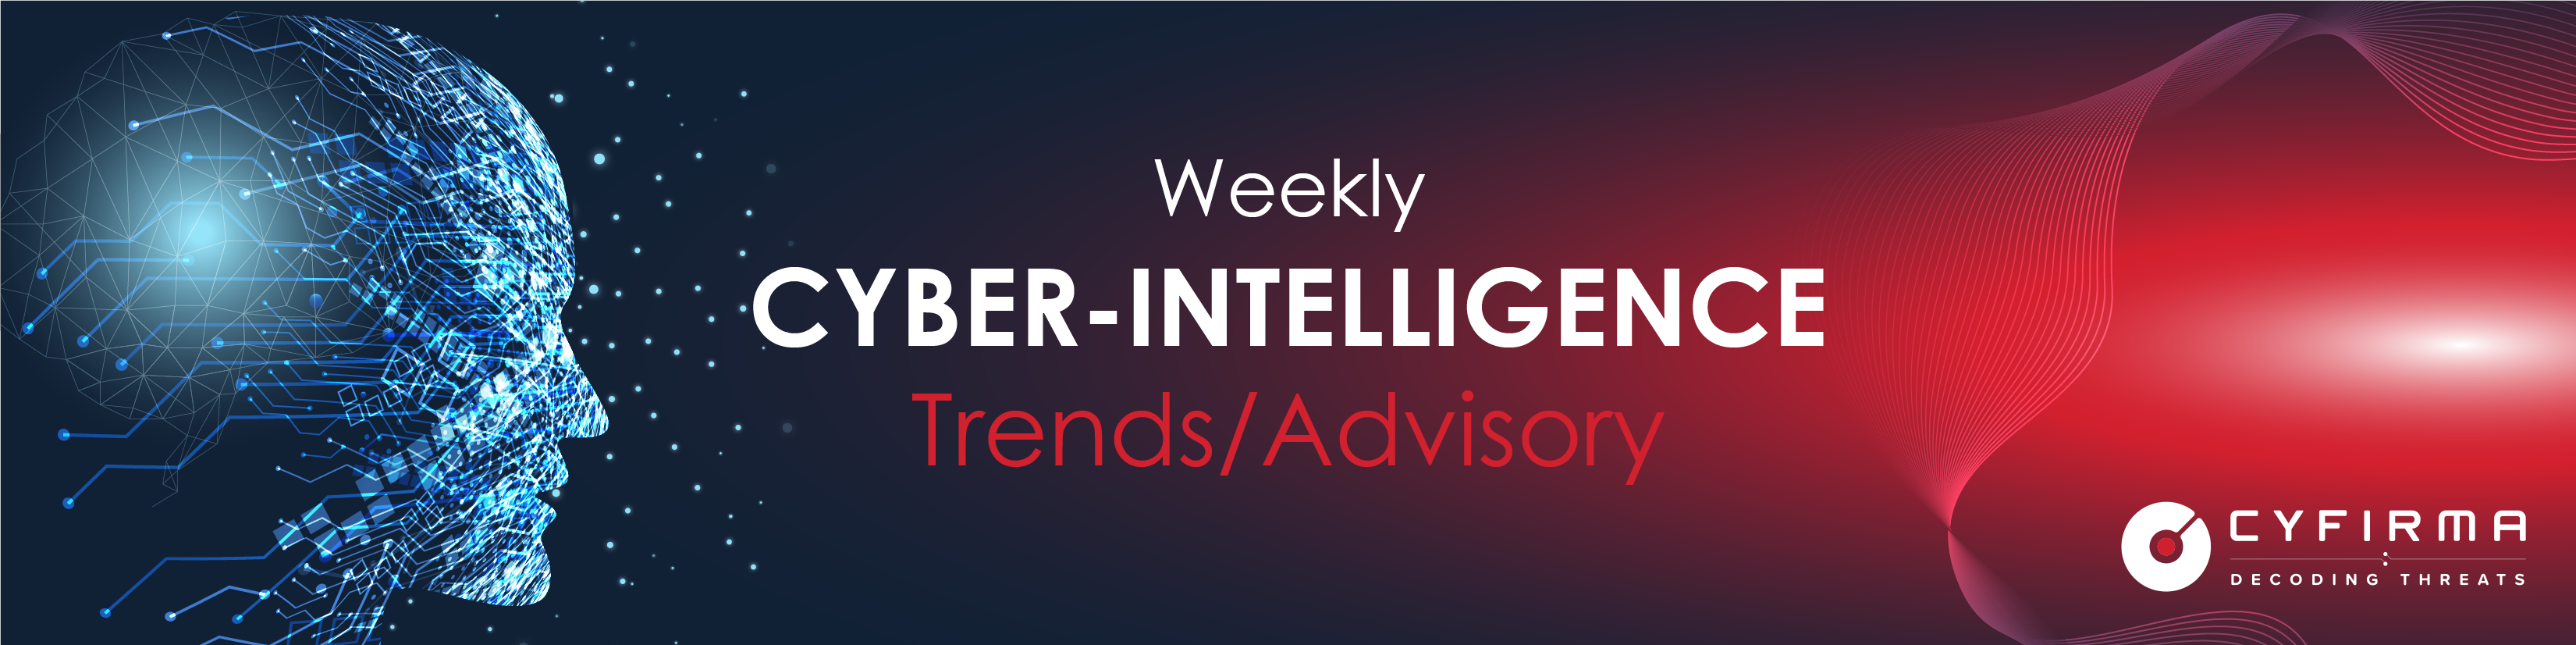 Weekly Intelligence Trends and Advisory | Threat Actor in Focus | Rise in Malware, Ransomware, Phishing | Vulnerability and Exploits – 28 Jan 2022